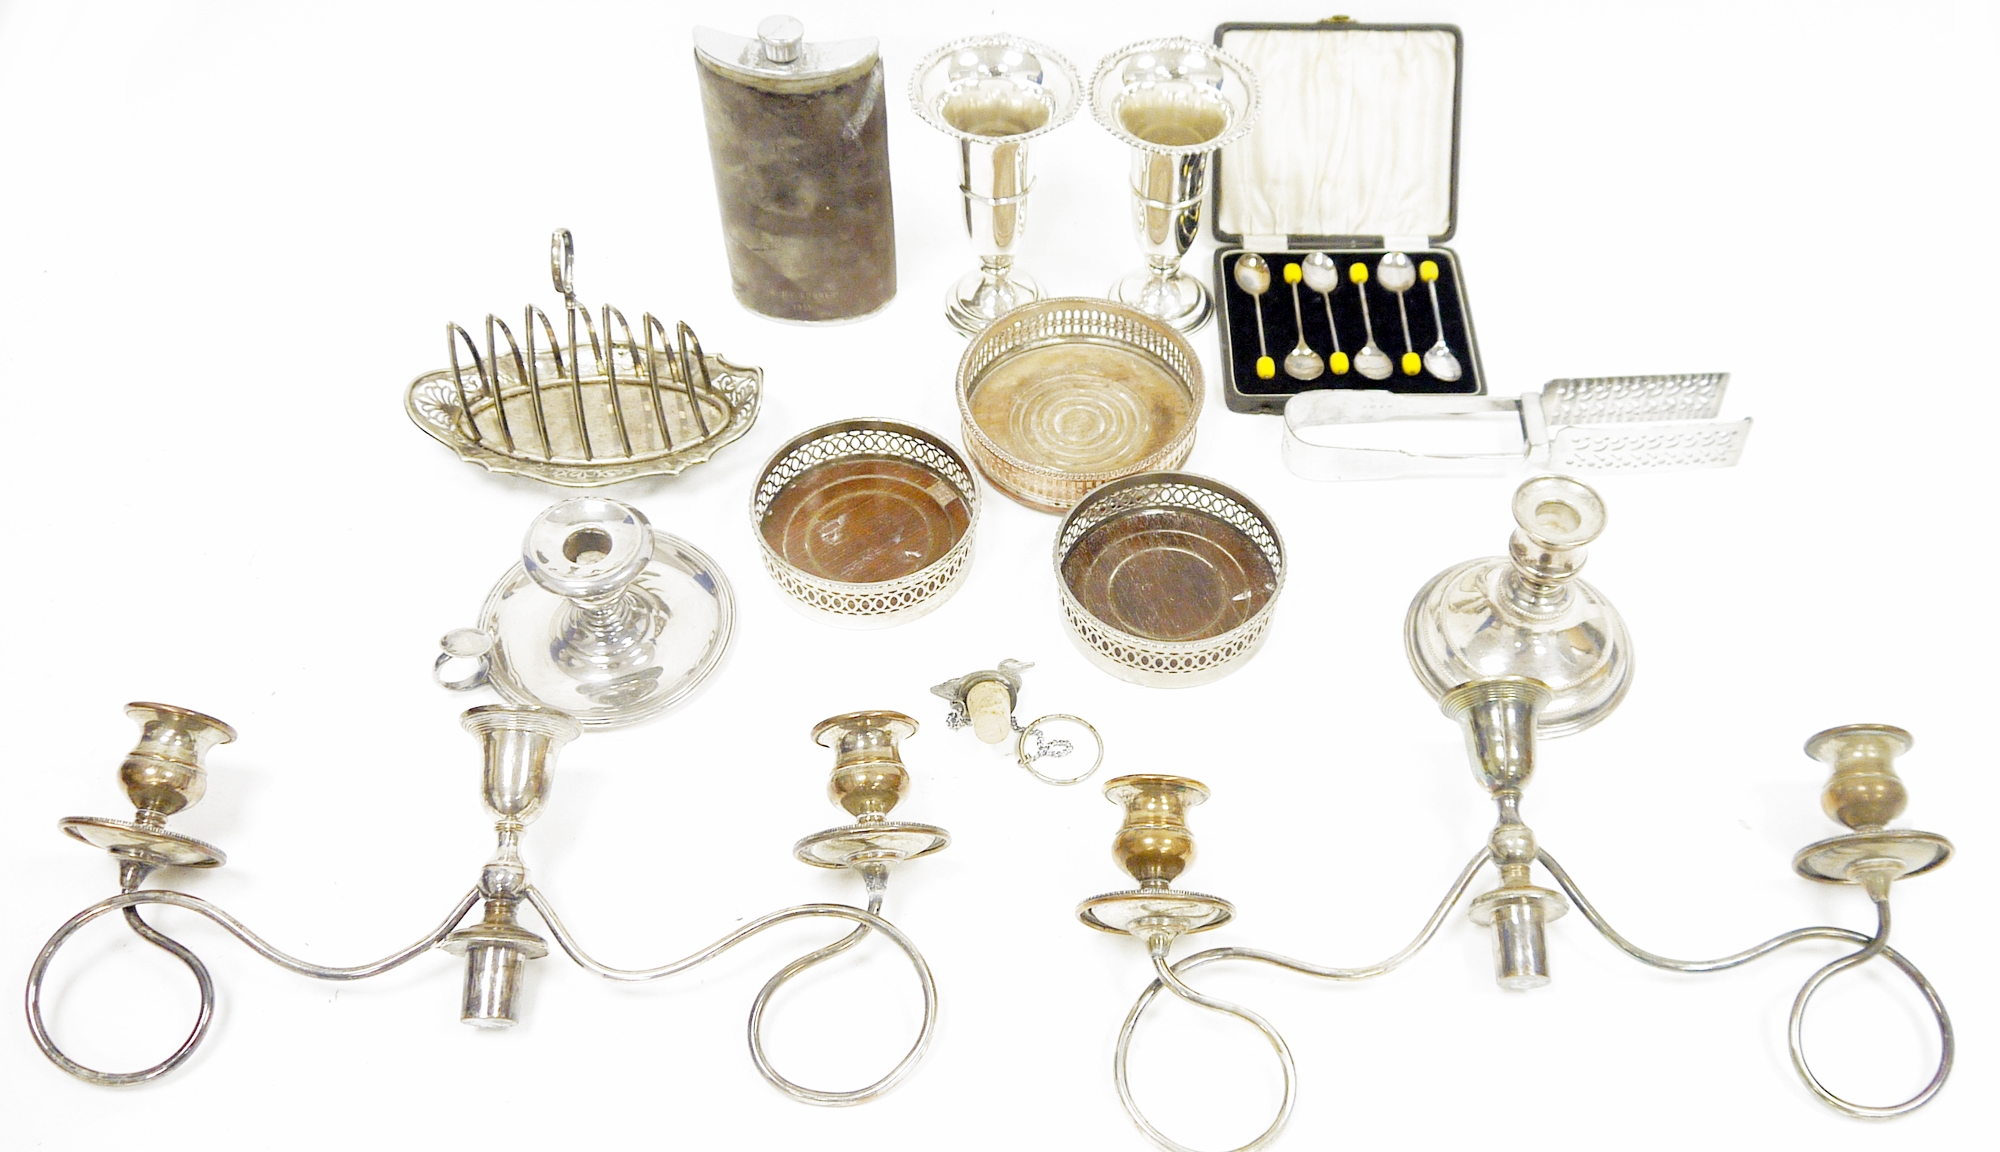 Pair of Garrard & Co silver plated spill vases and an assortment of other silver plate including a